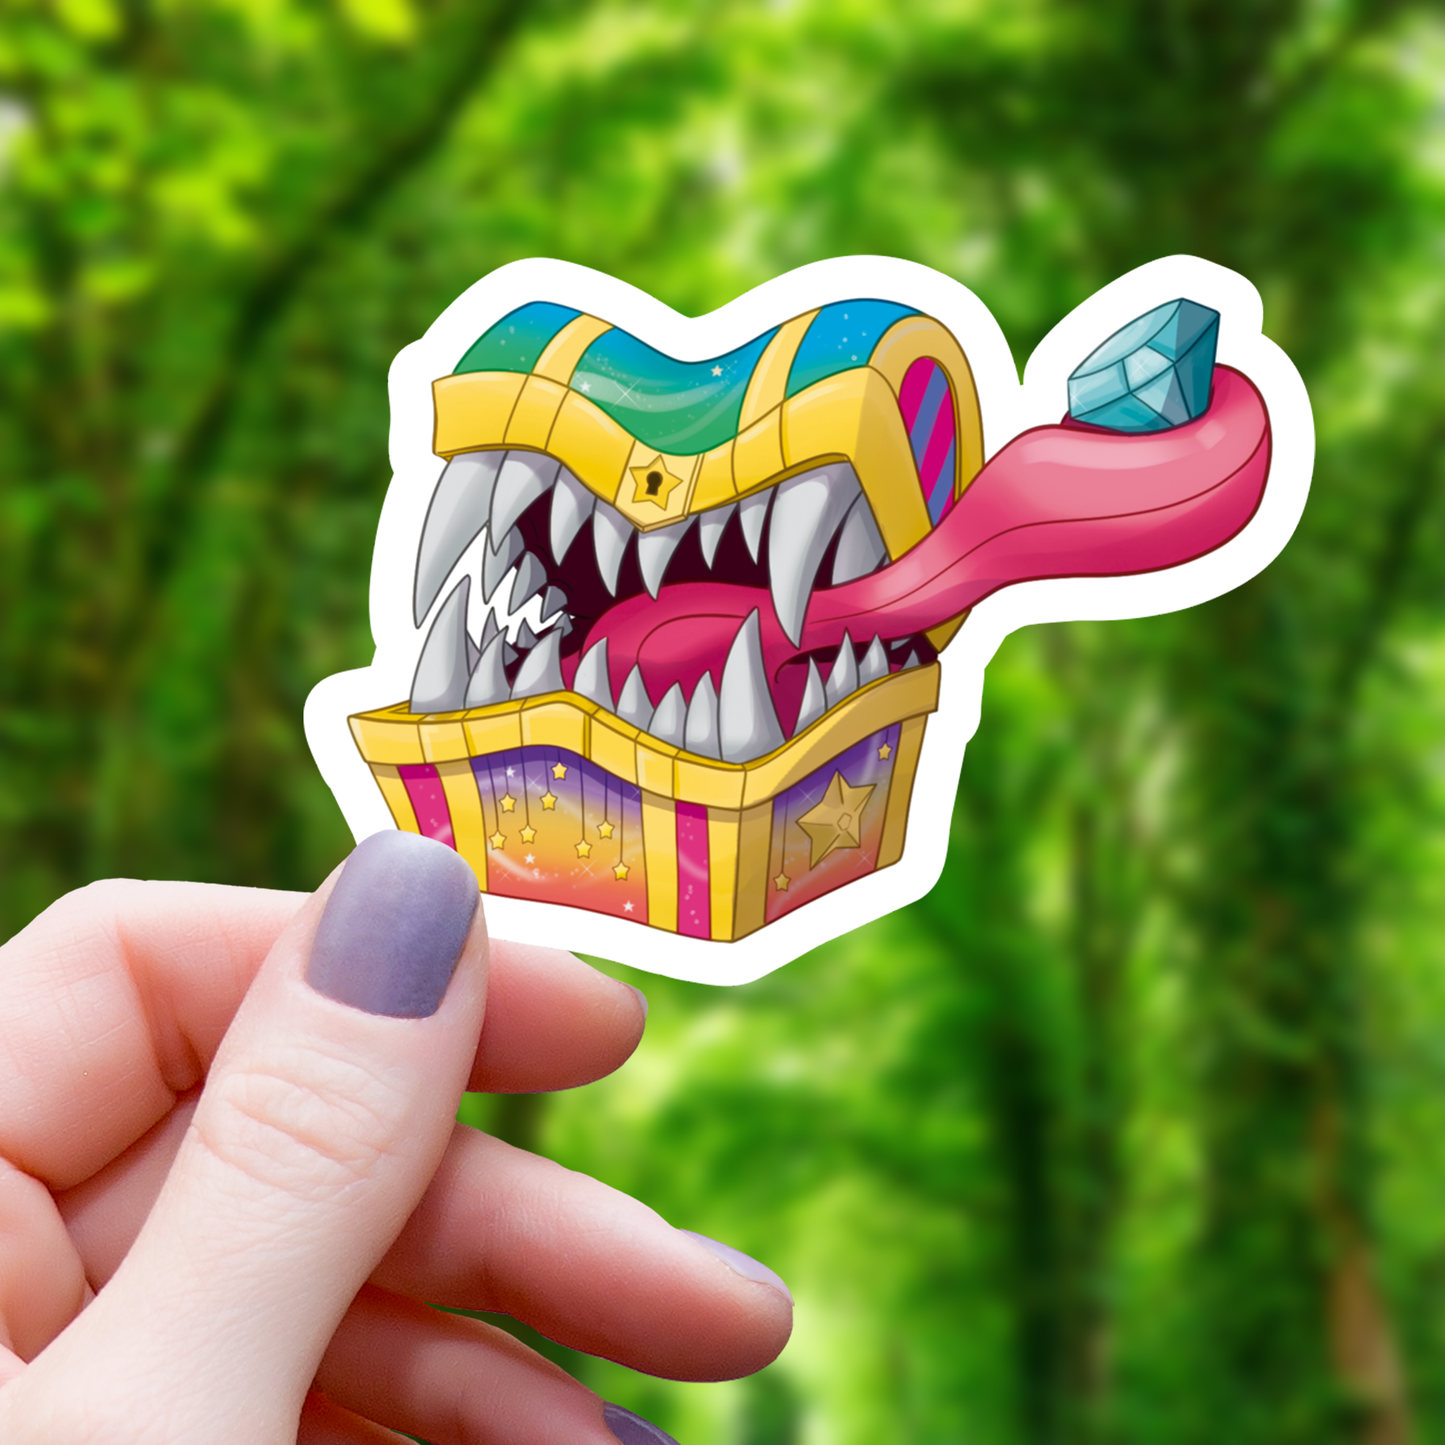 Mimic Gaming Co - Rainbow Chest Mimic Monster Sticker - 3"